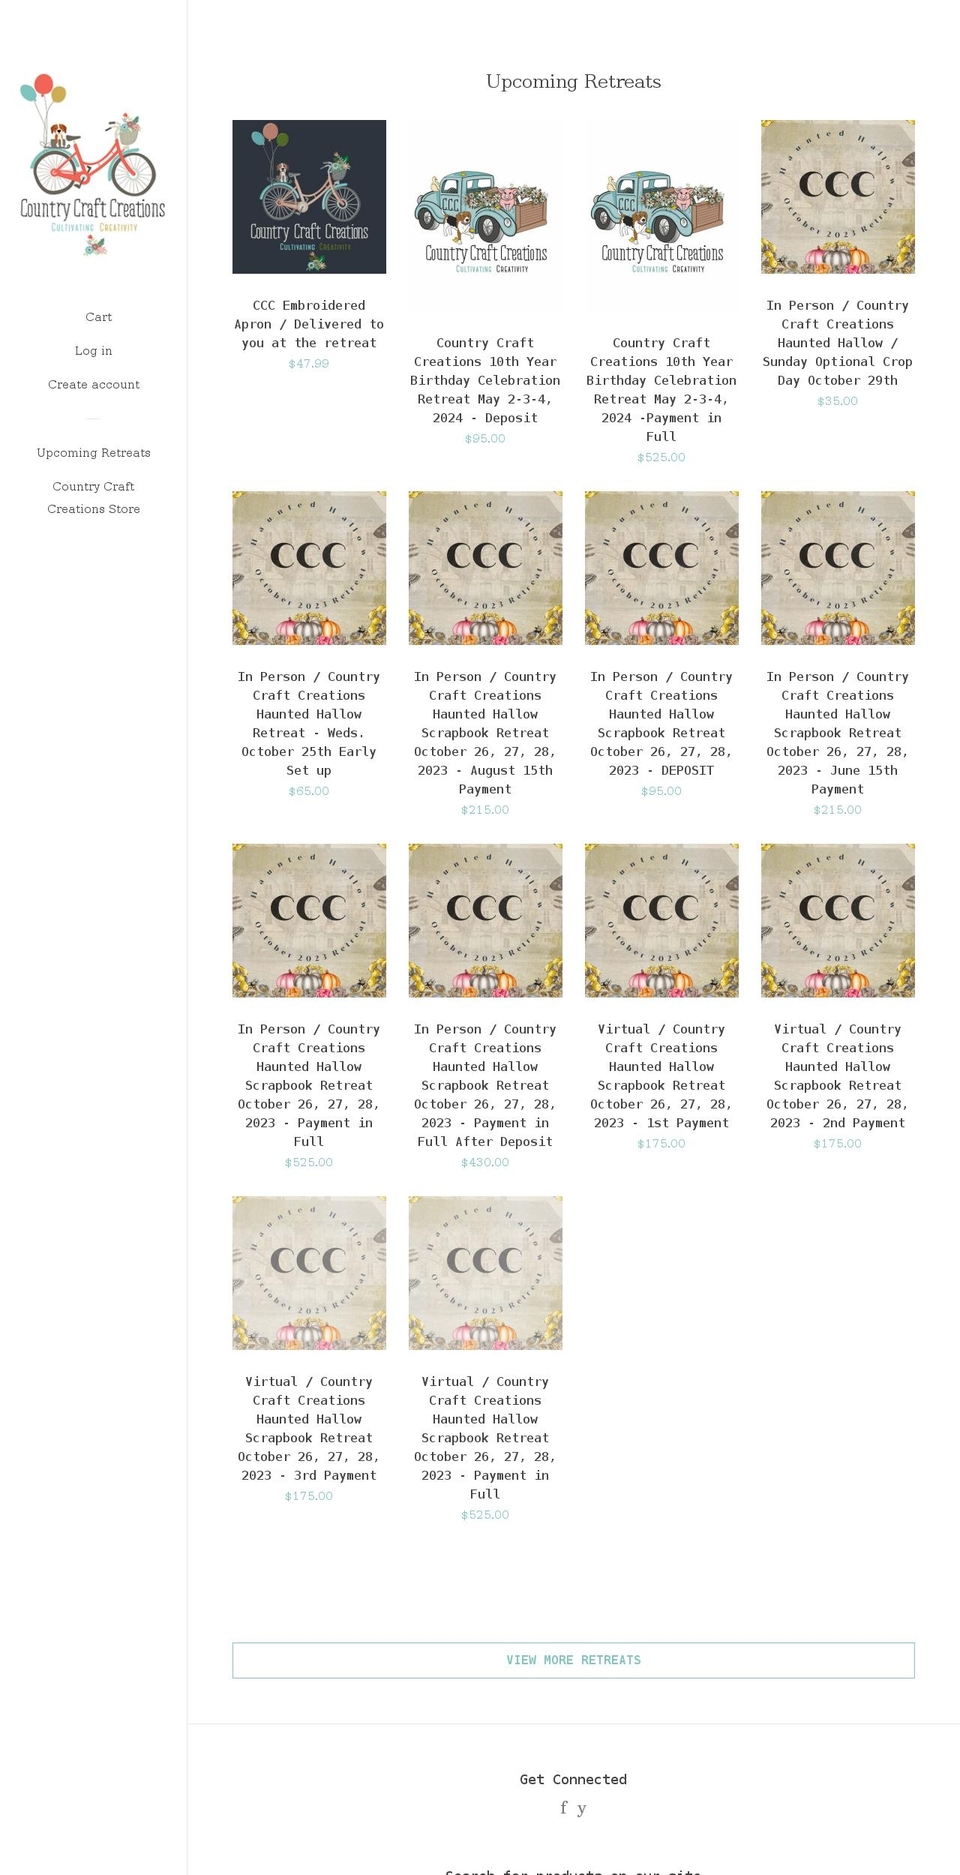 Pop with Installments message Shopify theme site example countrycraftretreats.com